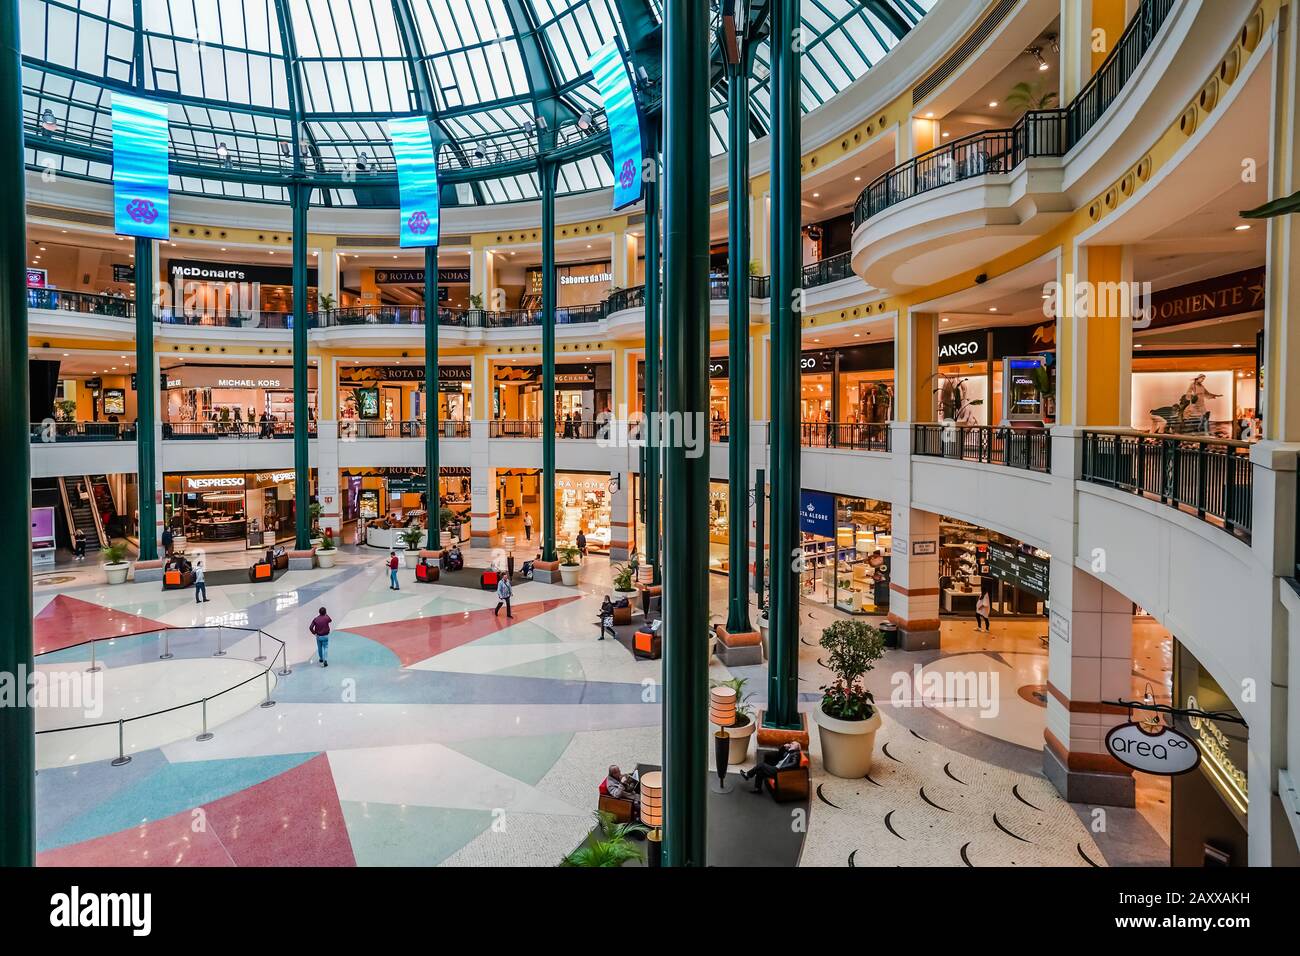 Portugal Lisbon Colombo Shopping Center High Resolution Stock Photography  and Images - Alamy